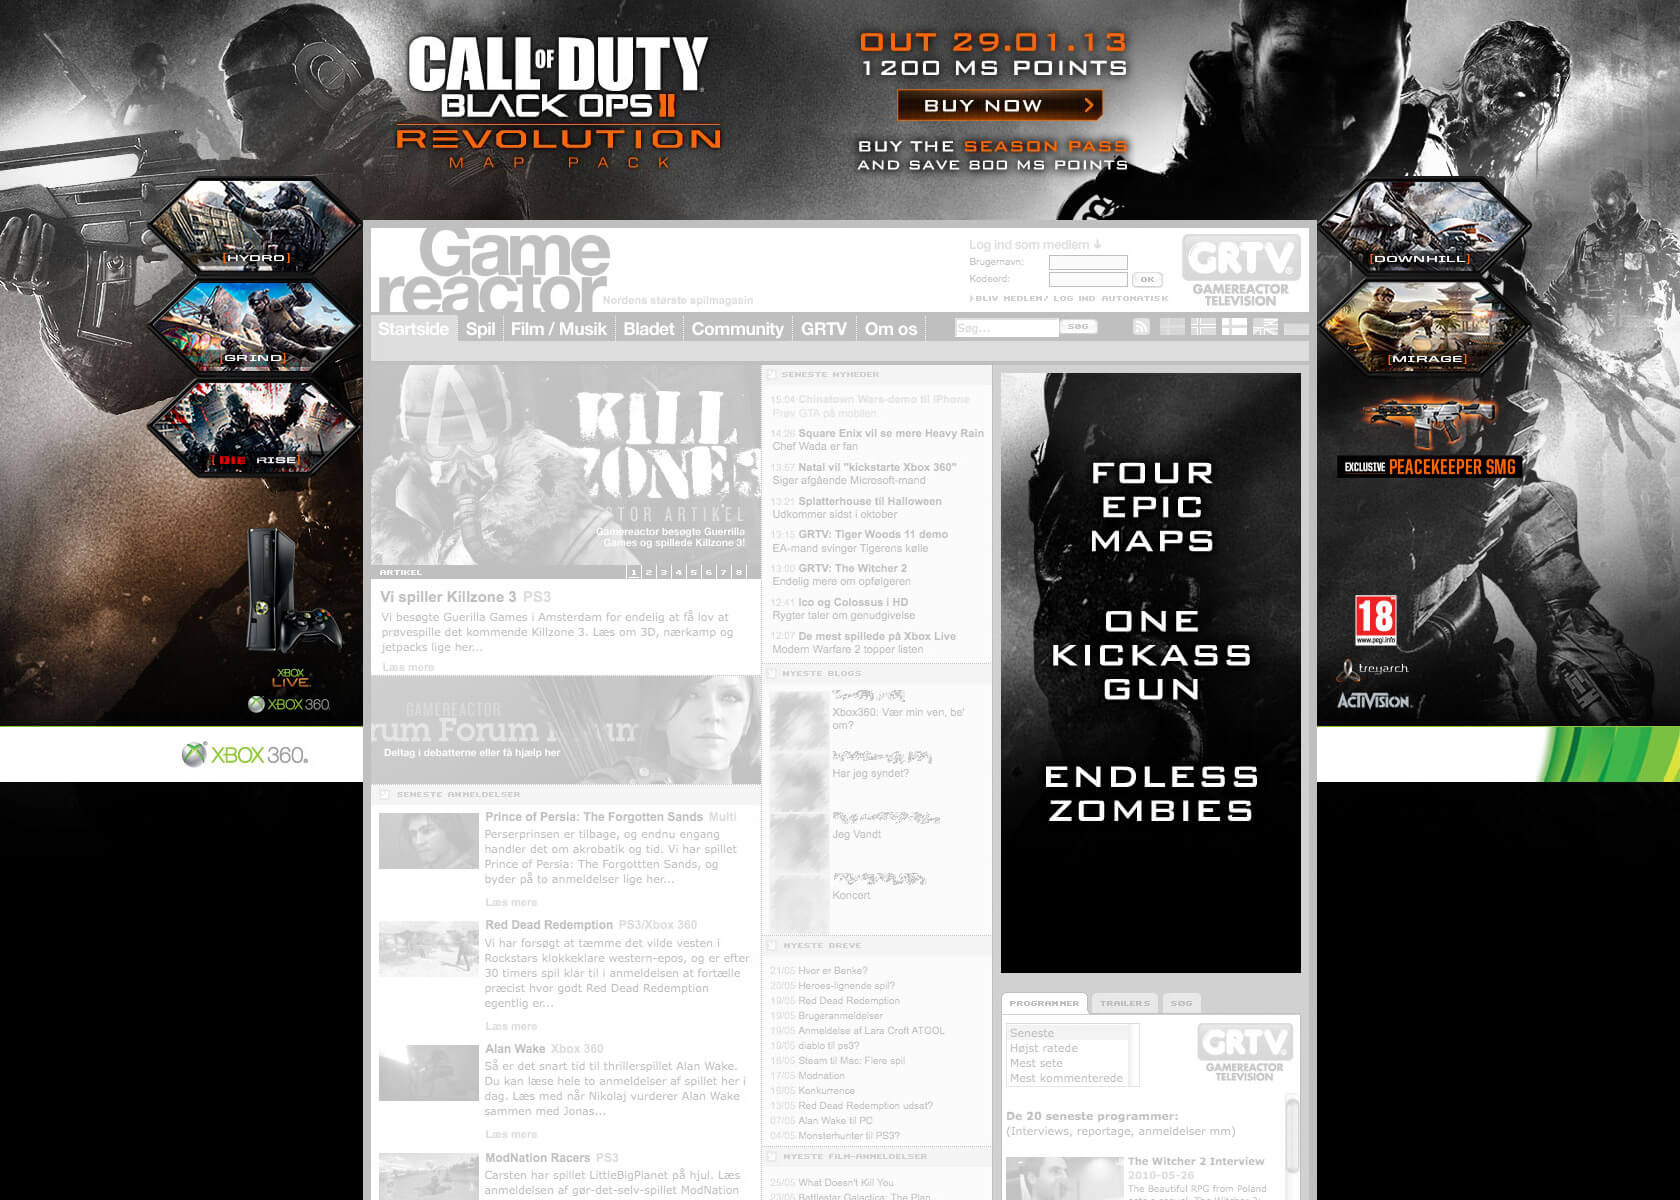 Call Of Duty: Black Ops 2 banner ad